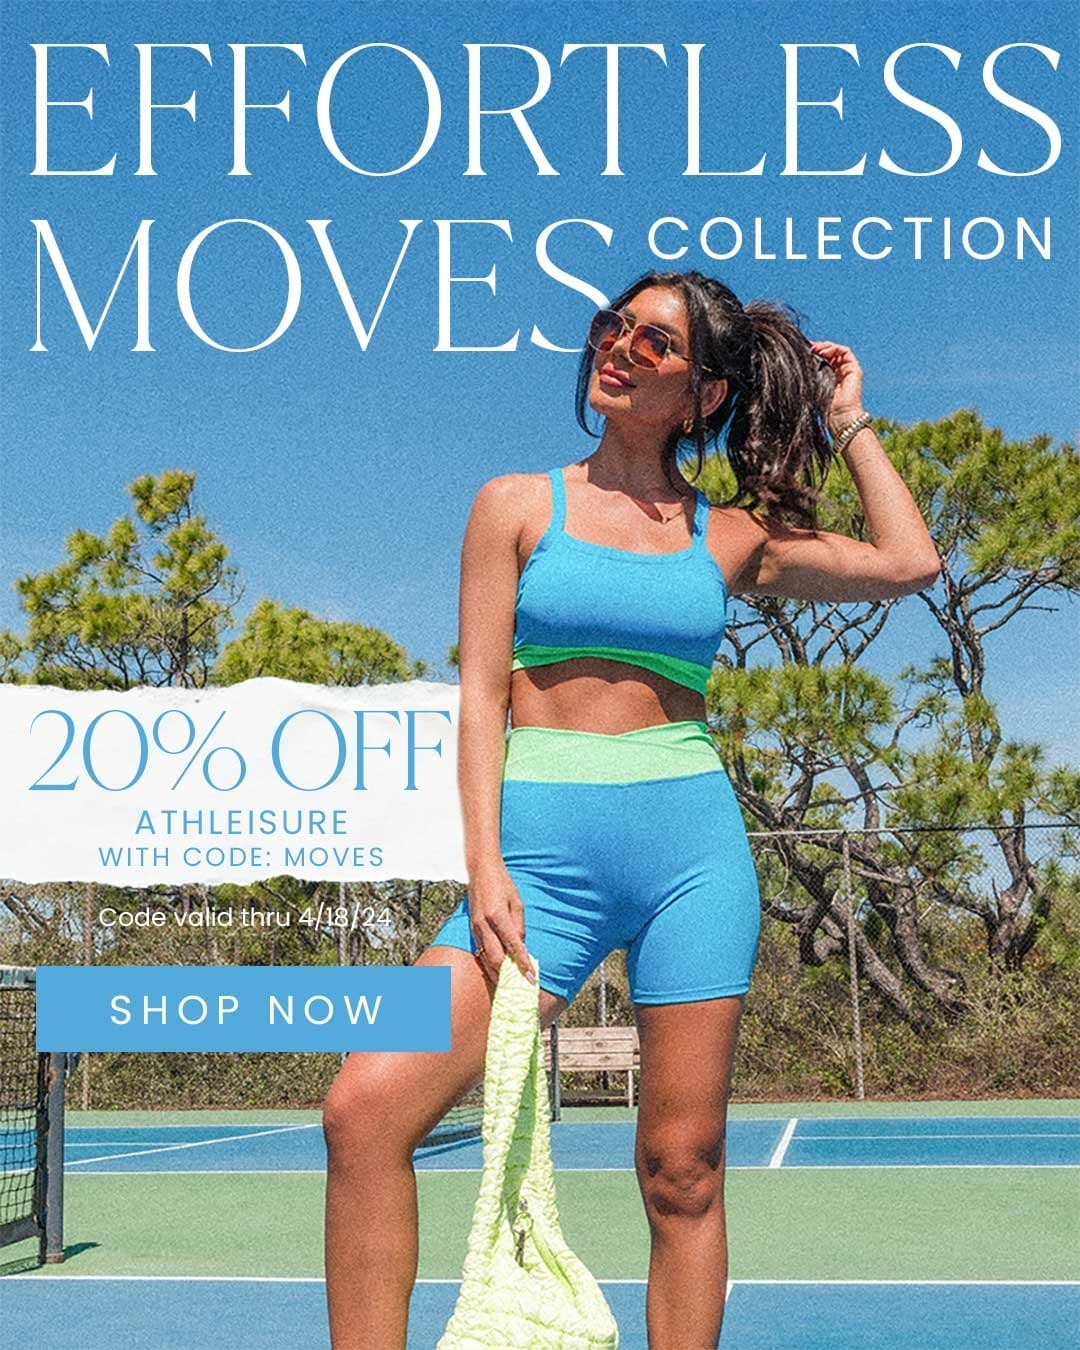 SHOP EFFORTLESS MOVES COLLECTION - 20% OFF ATHLEISURE WITH CODE: MOVES